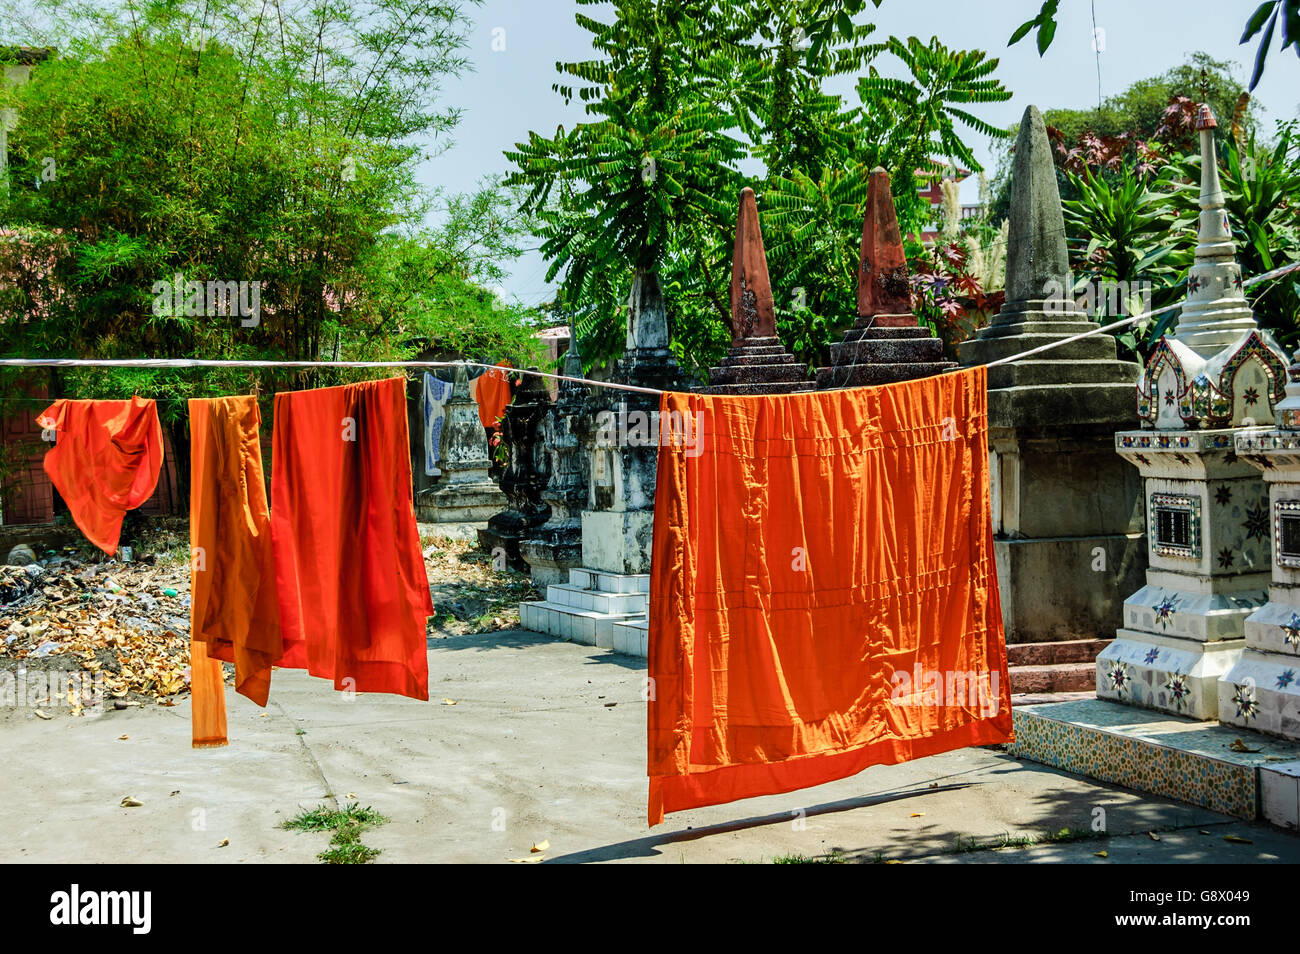 Buddhist monks' robes hanging to dry in temple grounds, Vientiane, Laos Stock Photo